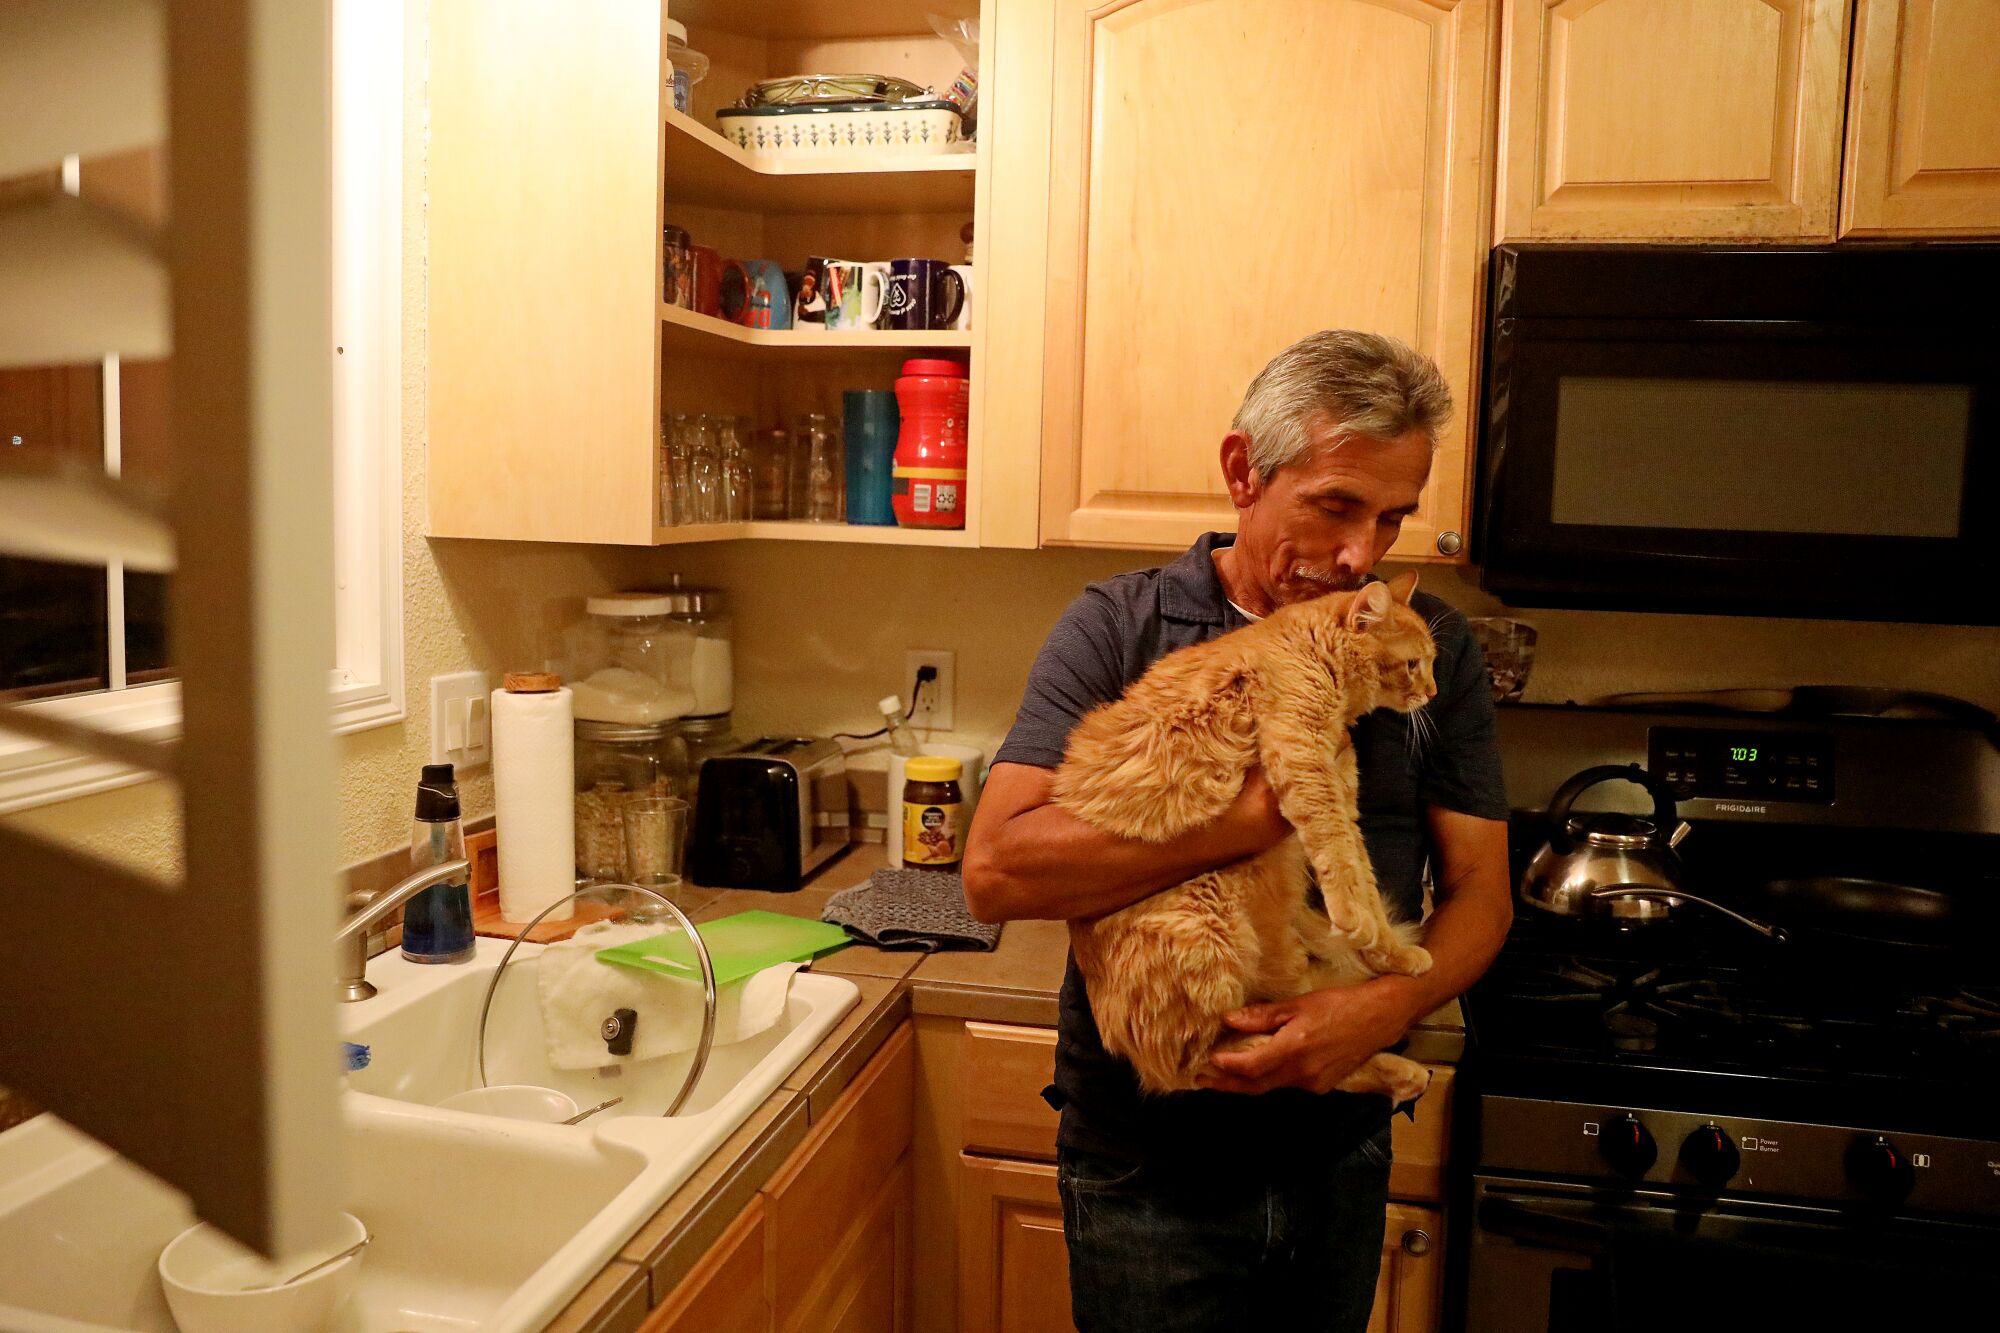 A man stands holding a cat in a small kitchen.